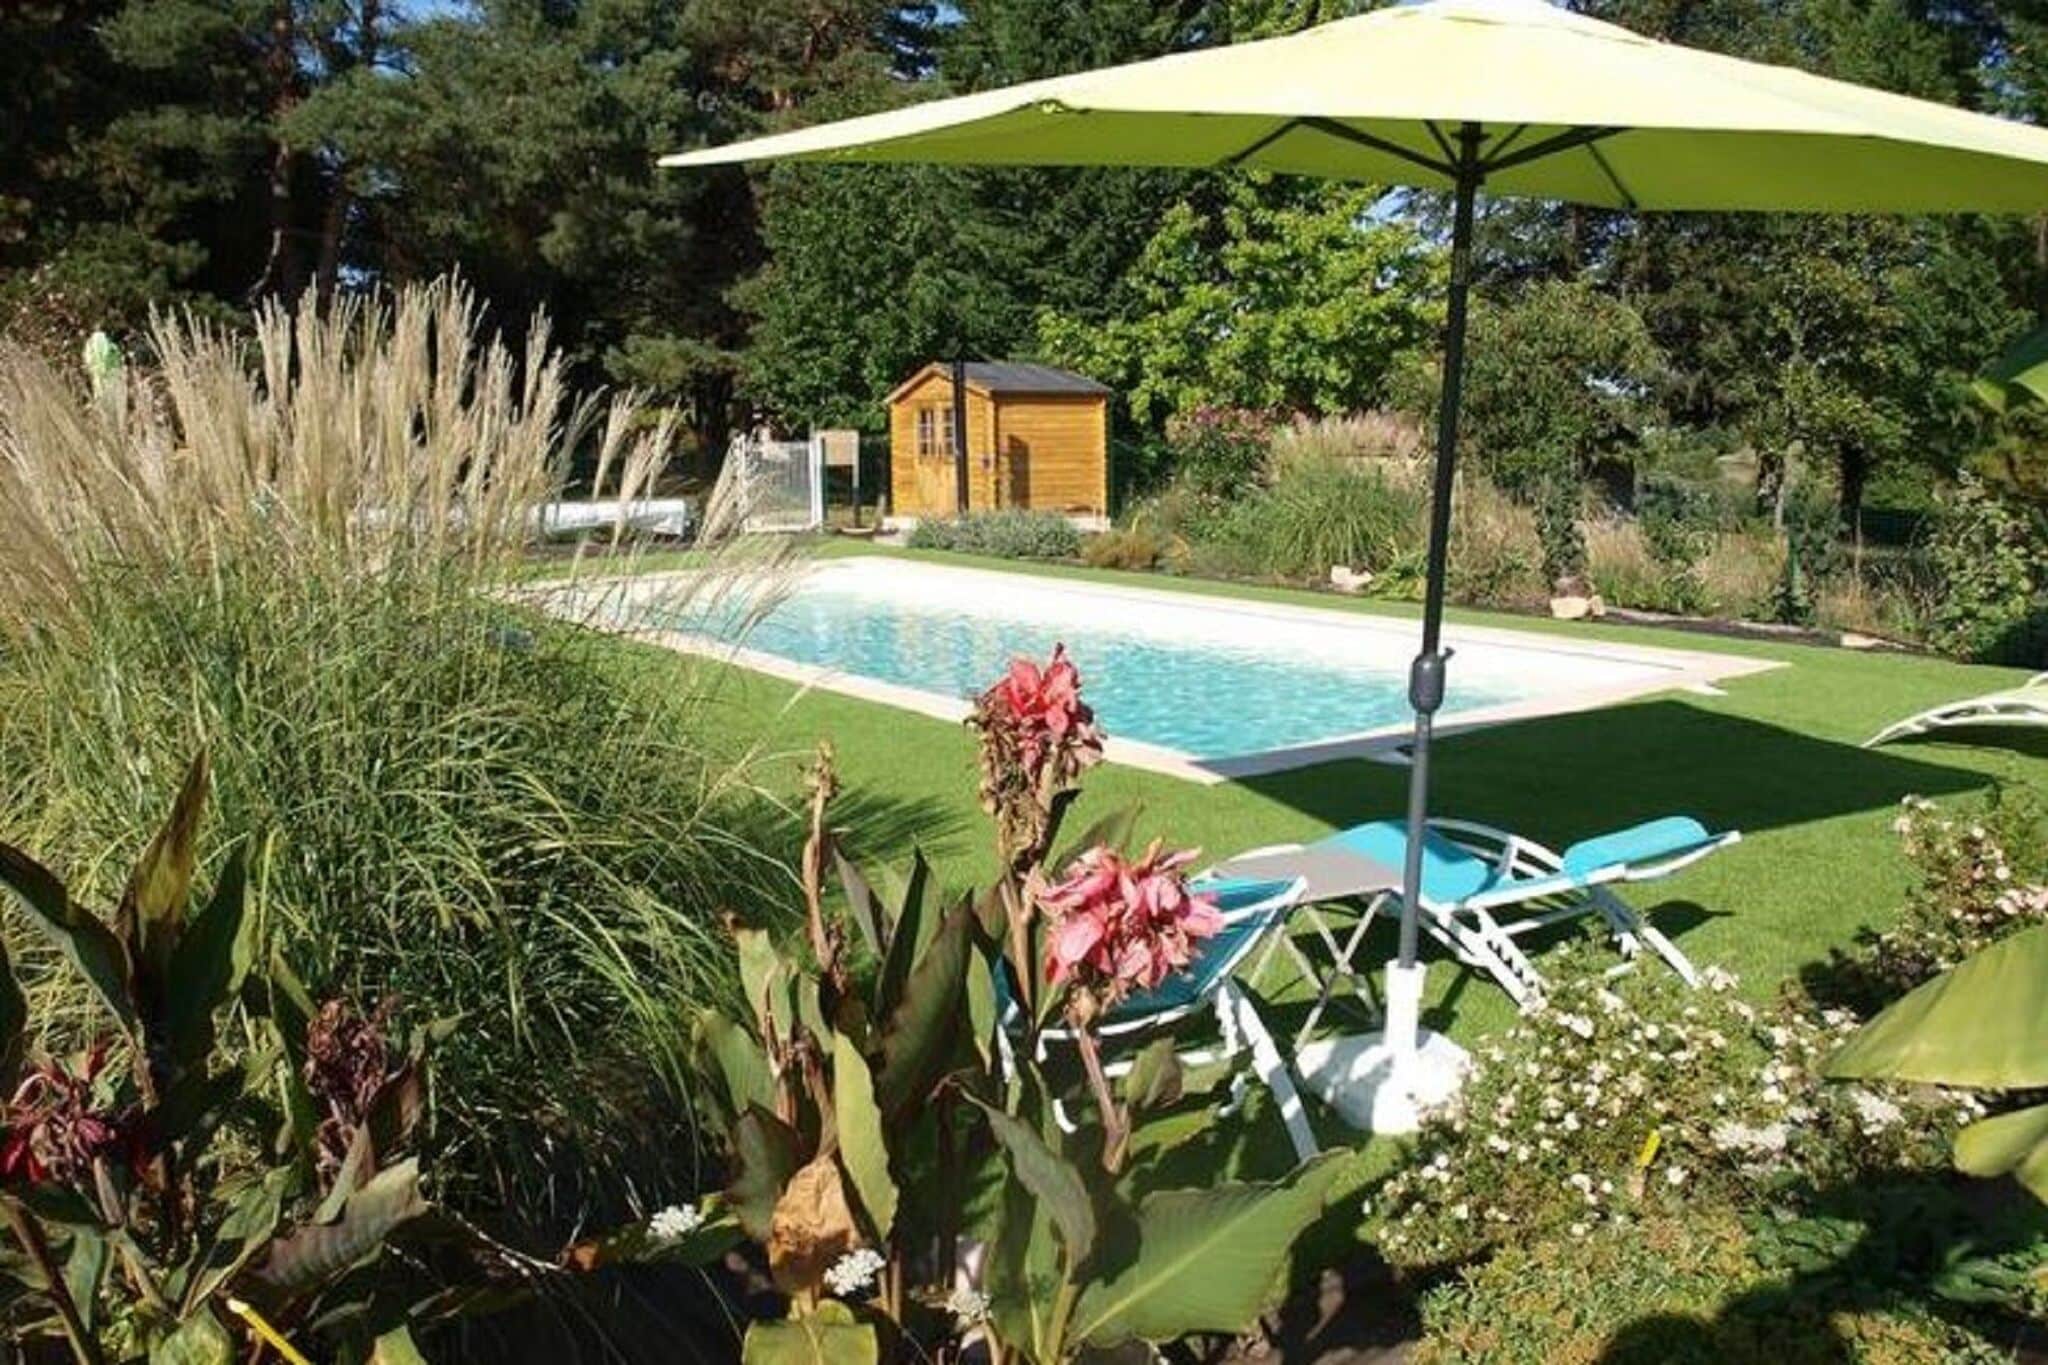 Three lovely gîtes surrounded by nature, with private swimming pool and garden